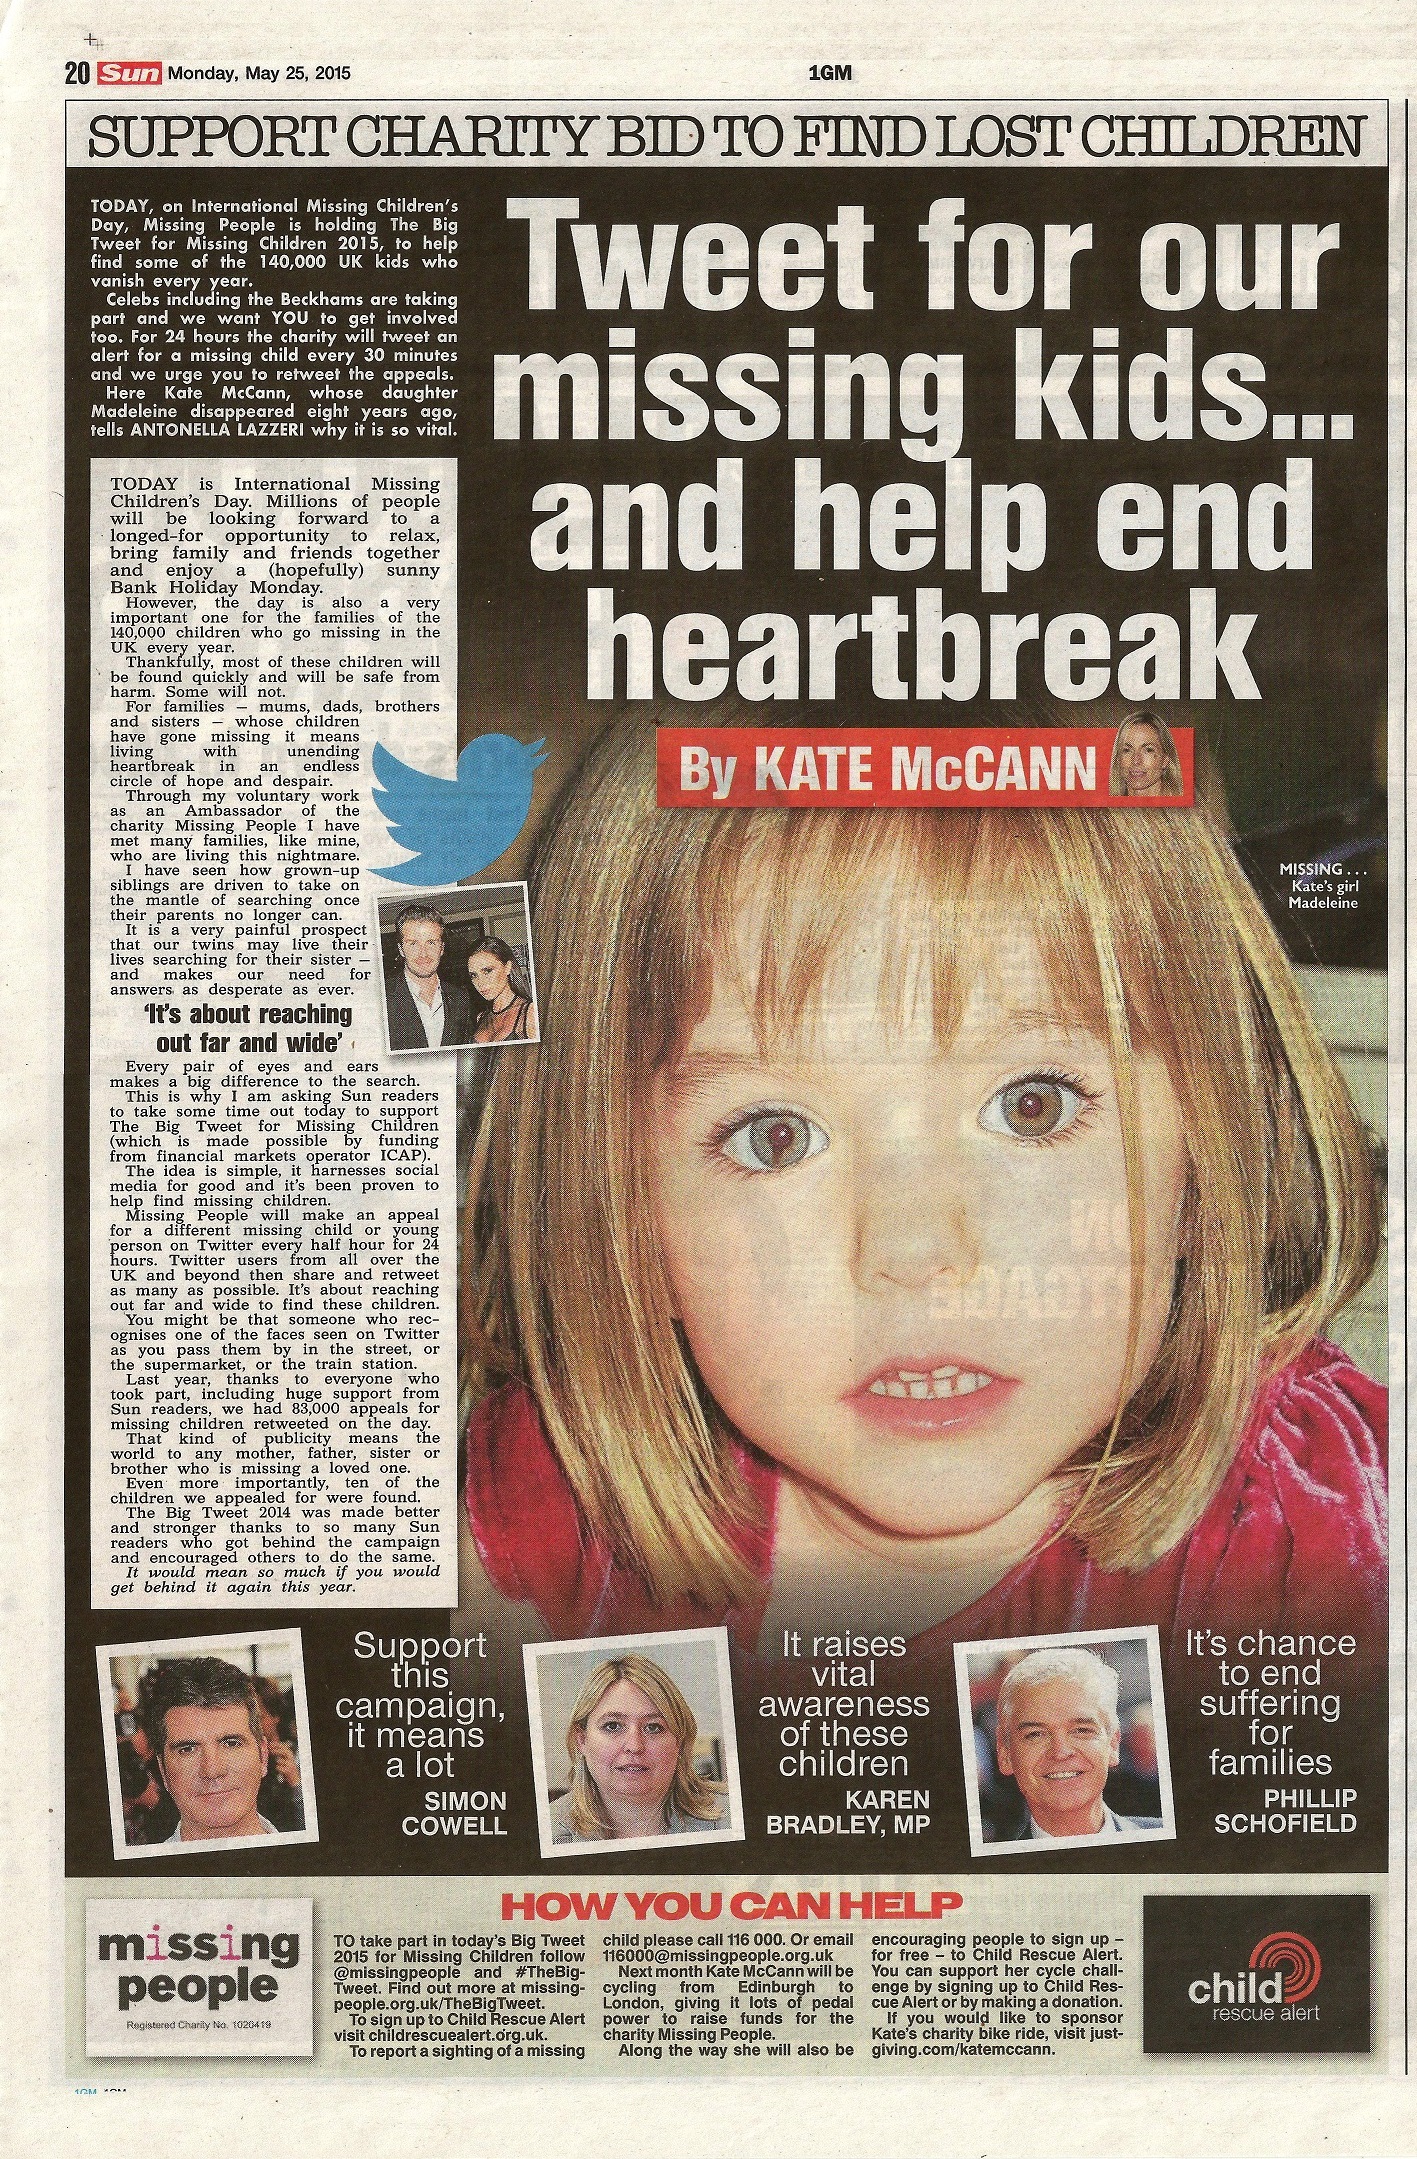 Tweet for our missing kids ... and help end heartbreak - The Sun (paper edition, page 20)